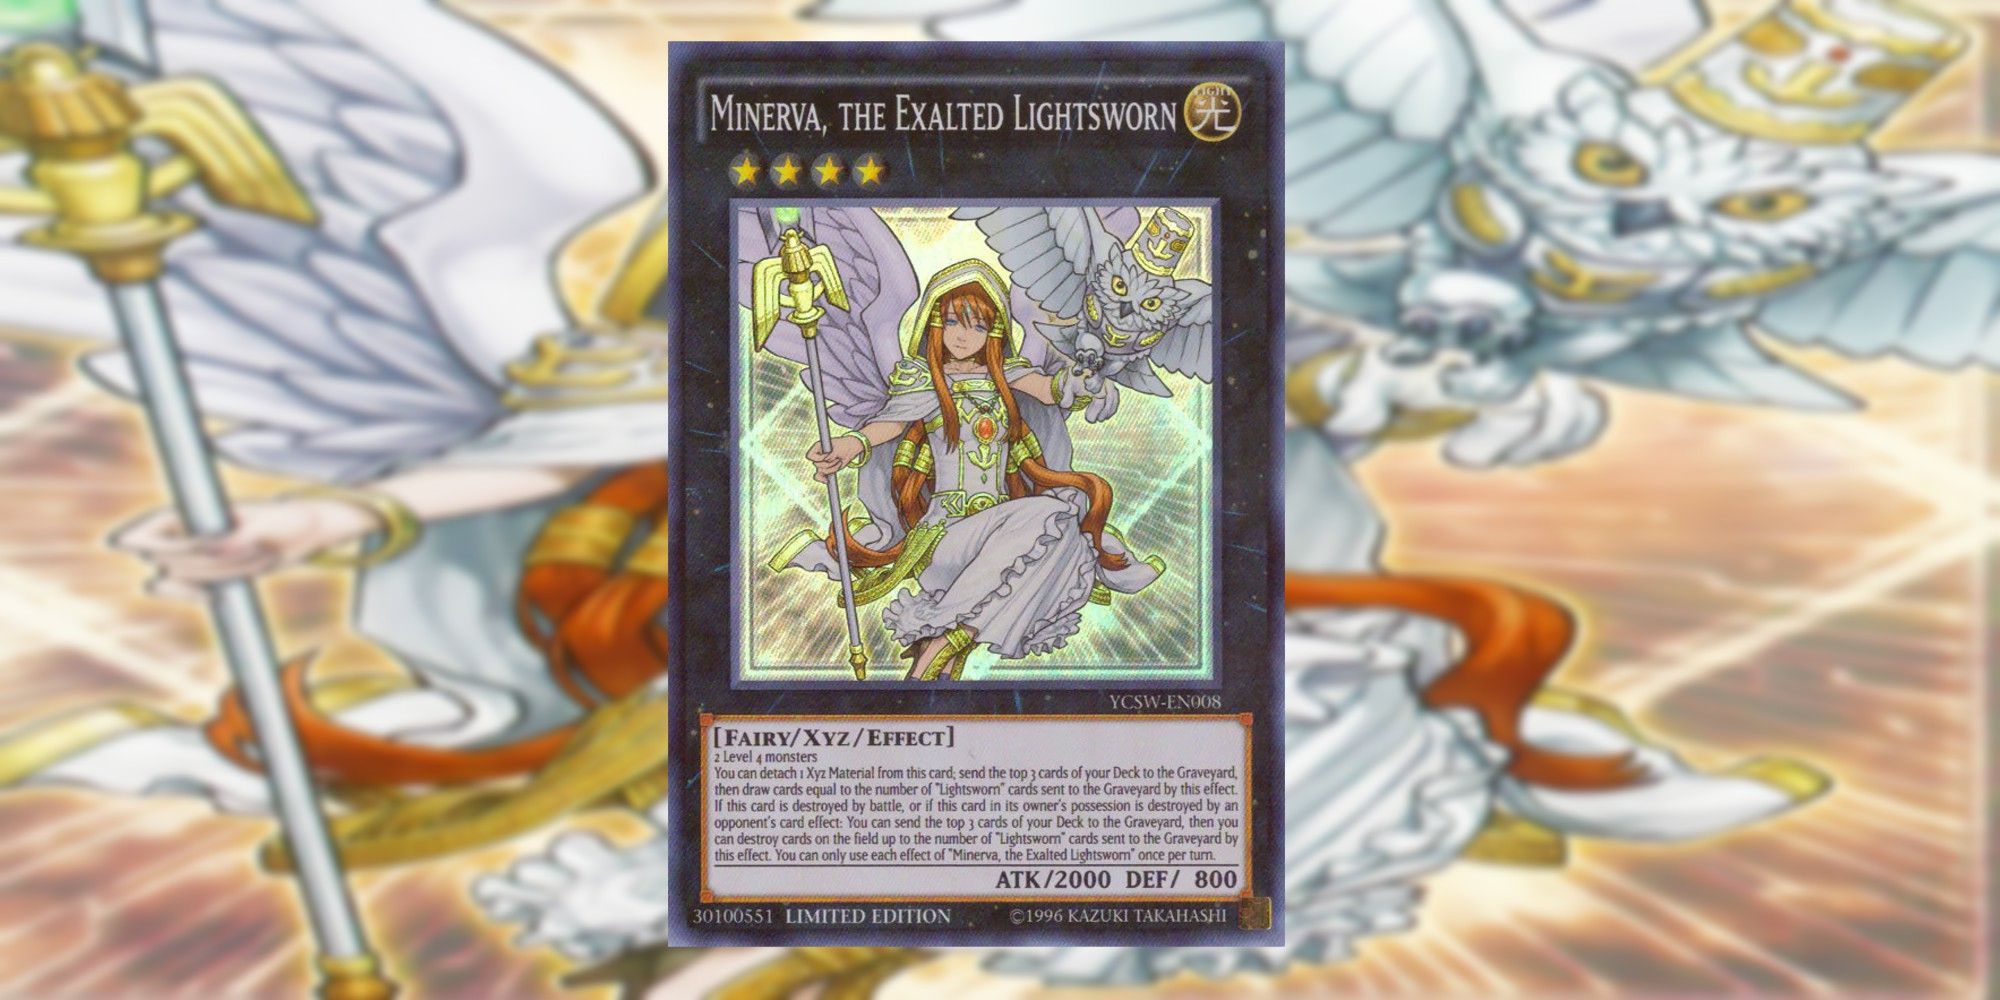 Minerva The Exalted Lightsworn card and art background